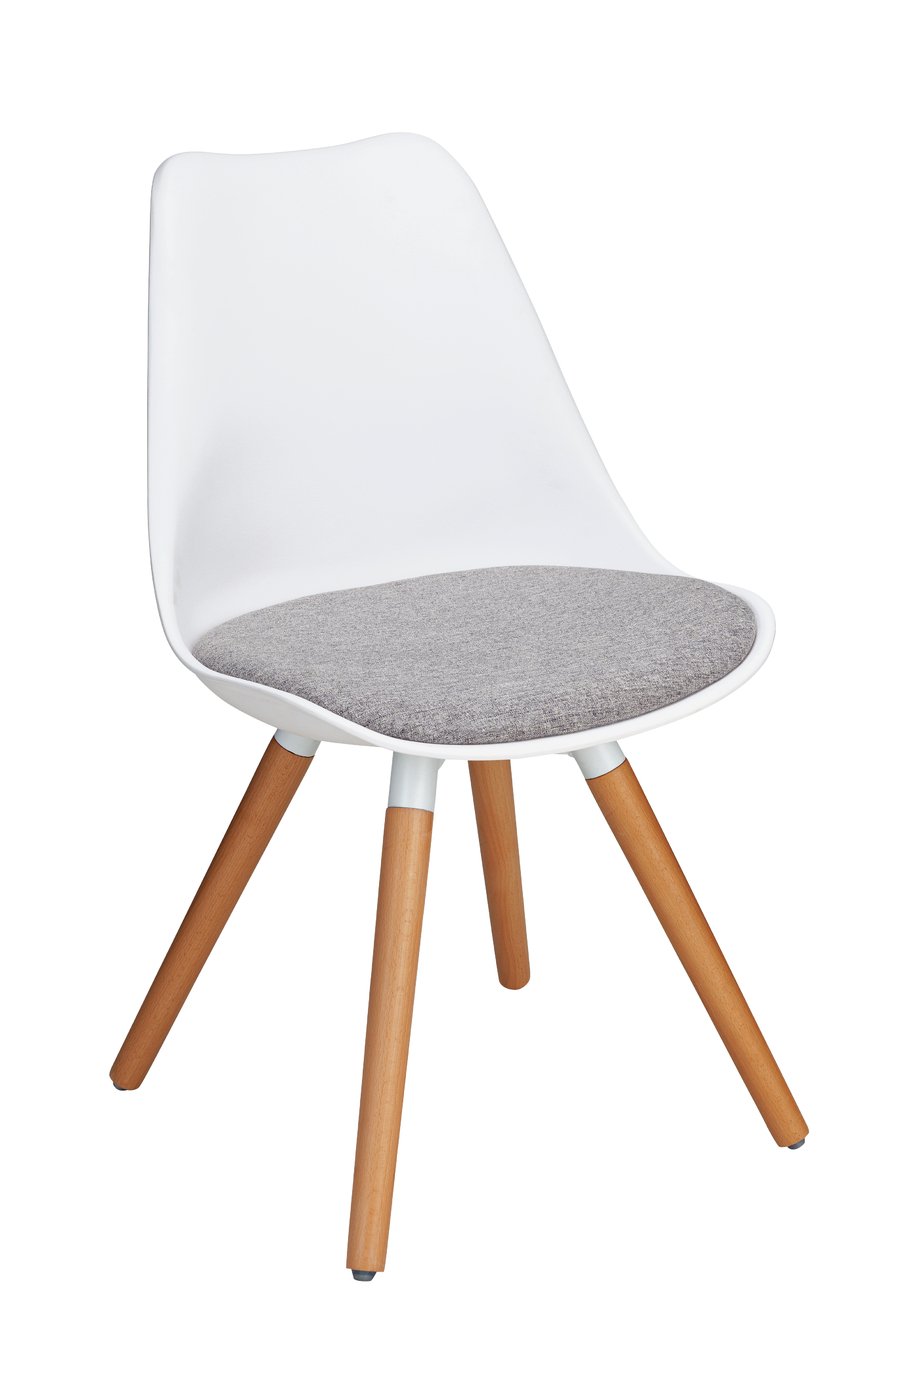 Argos Home Charlie Fabric Dining Chair - White & Grey